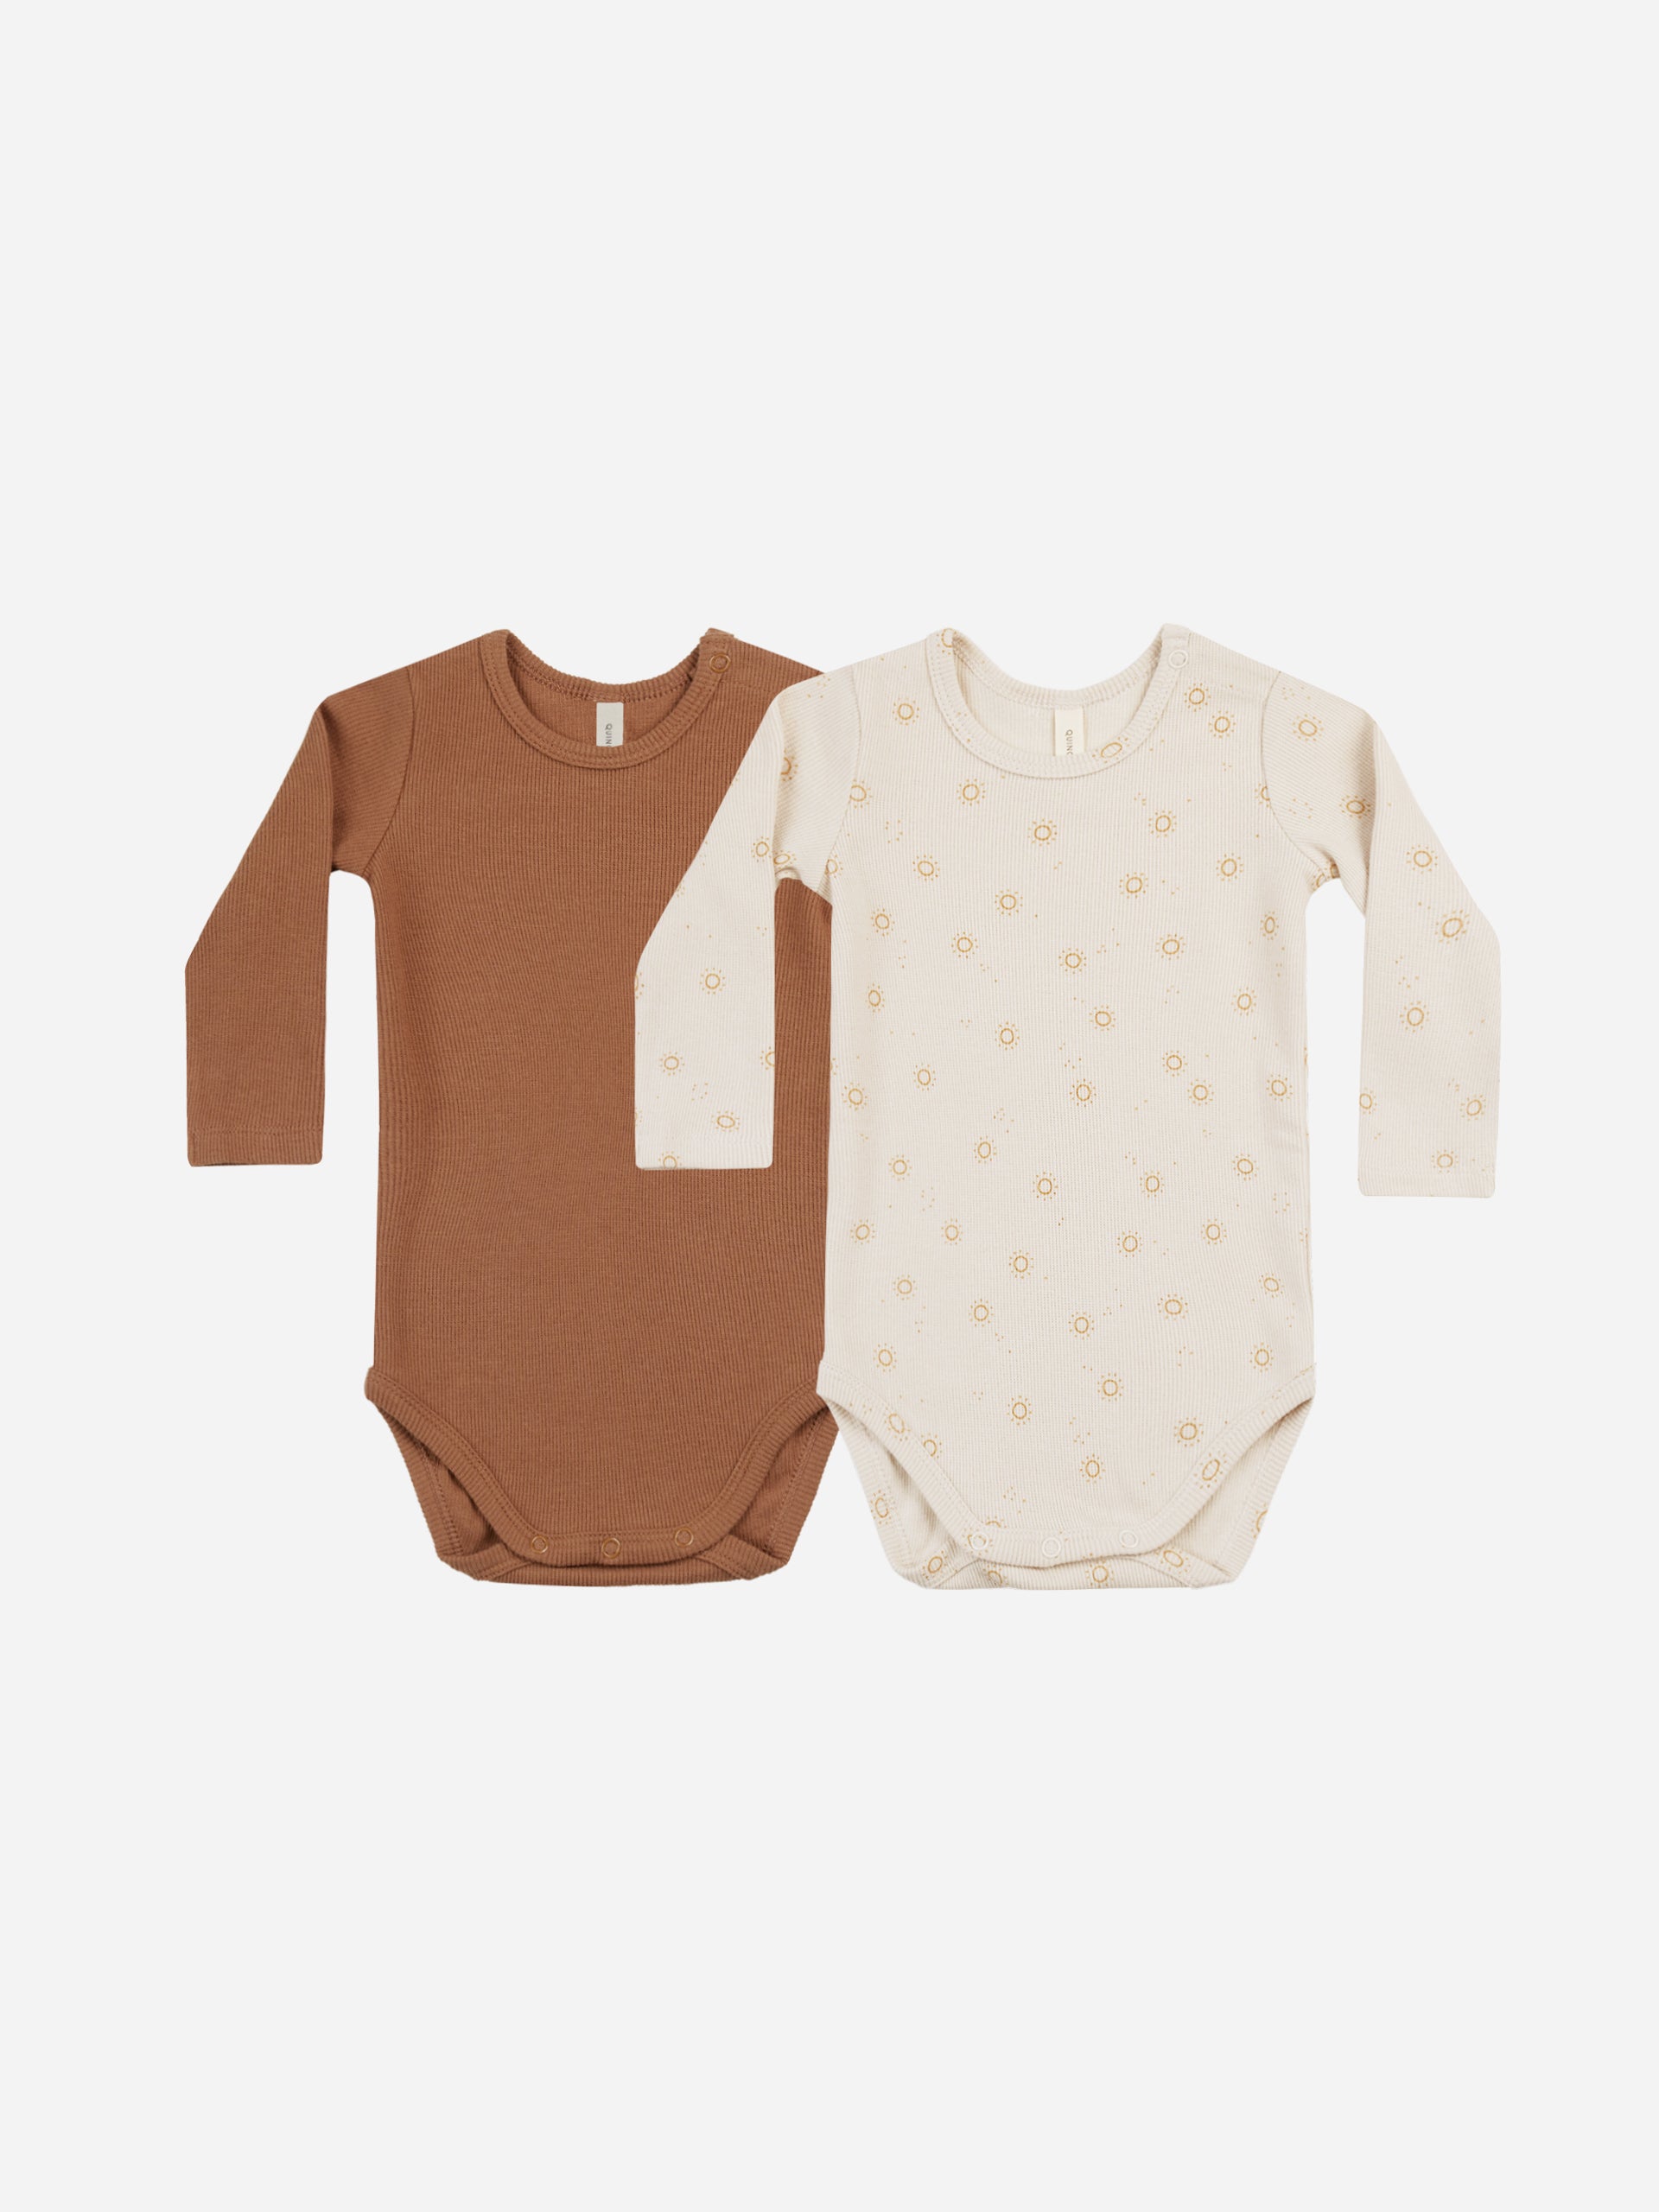 Ribbed Bodysuit, 2 Pack || Suns, Clay - Rylee + Cru | Kids Clothes | Trendy Baby Clothes | Modern Infant Outfits |